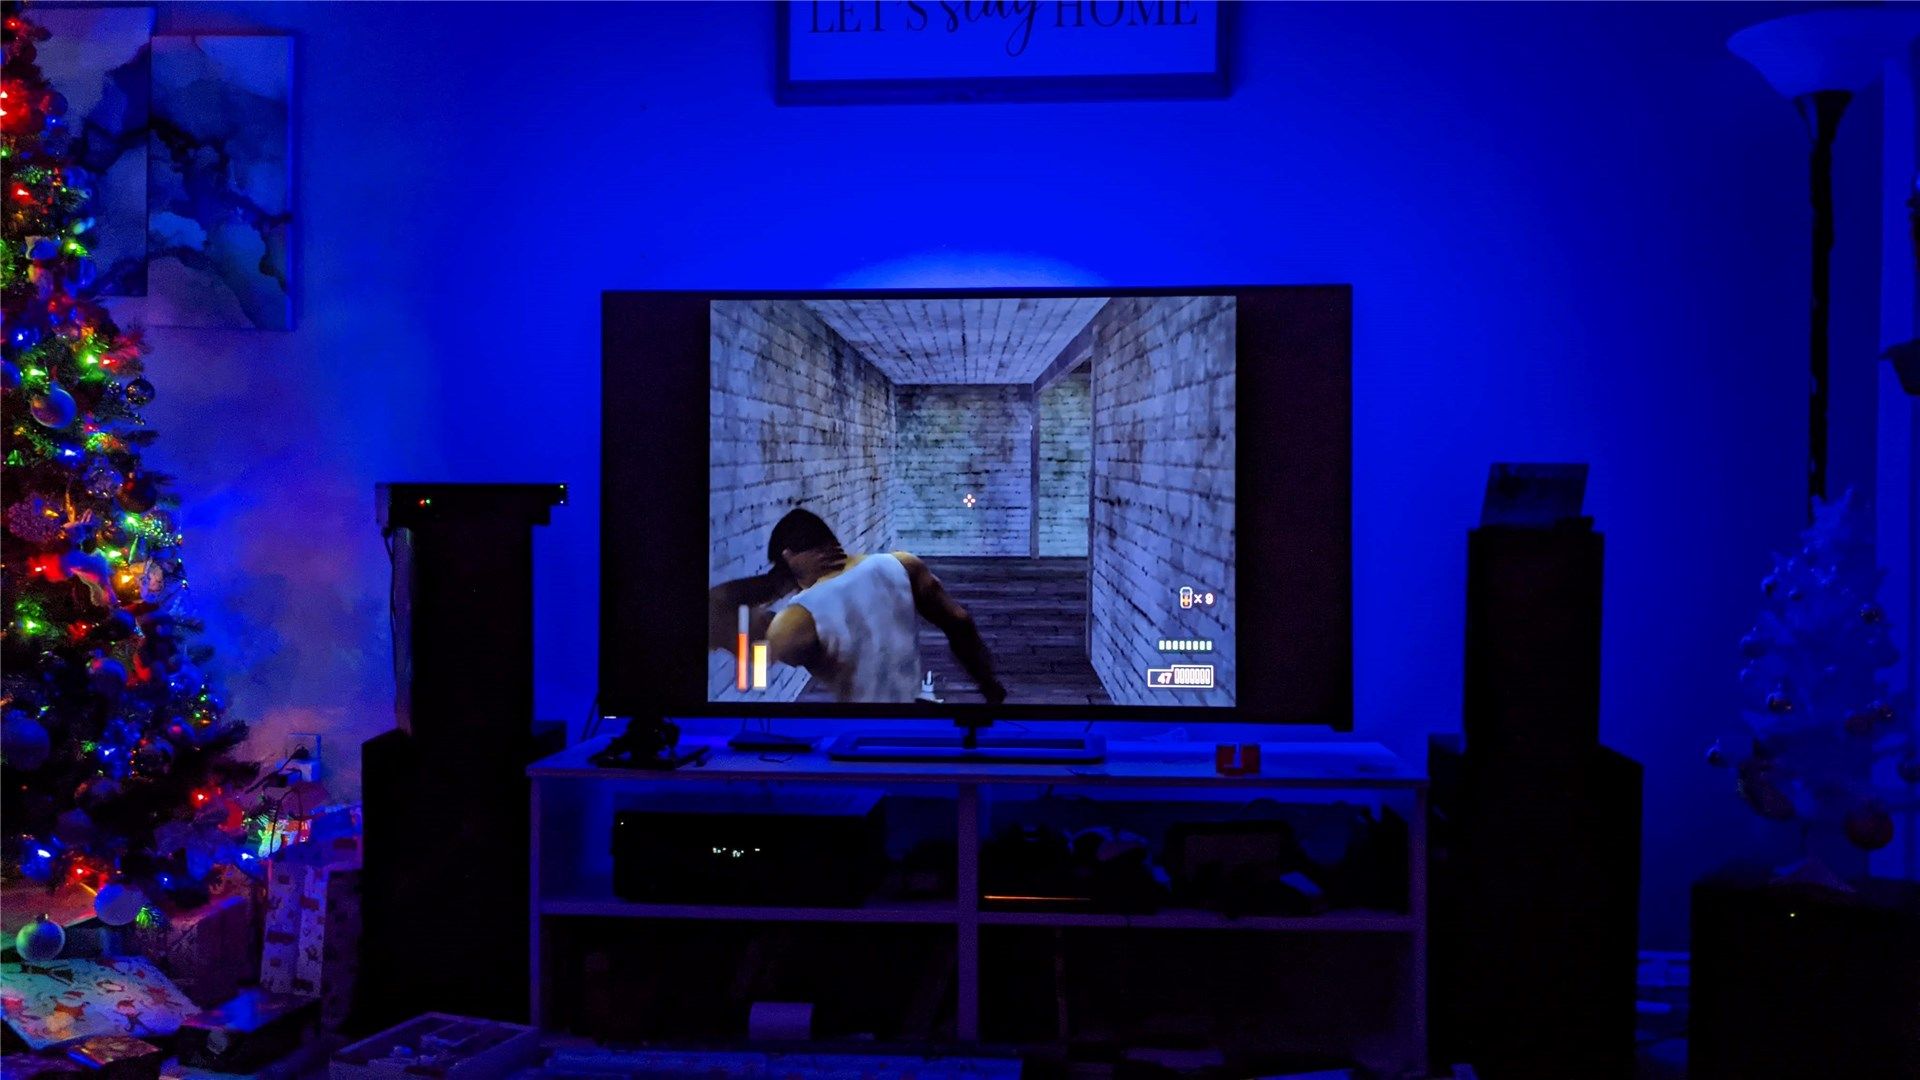 The Immersion showing a blue hue with The Suffering PlayStation 2 game on the TV